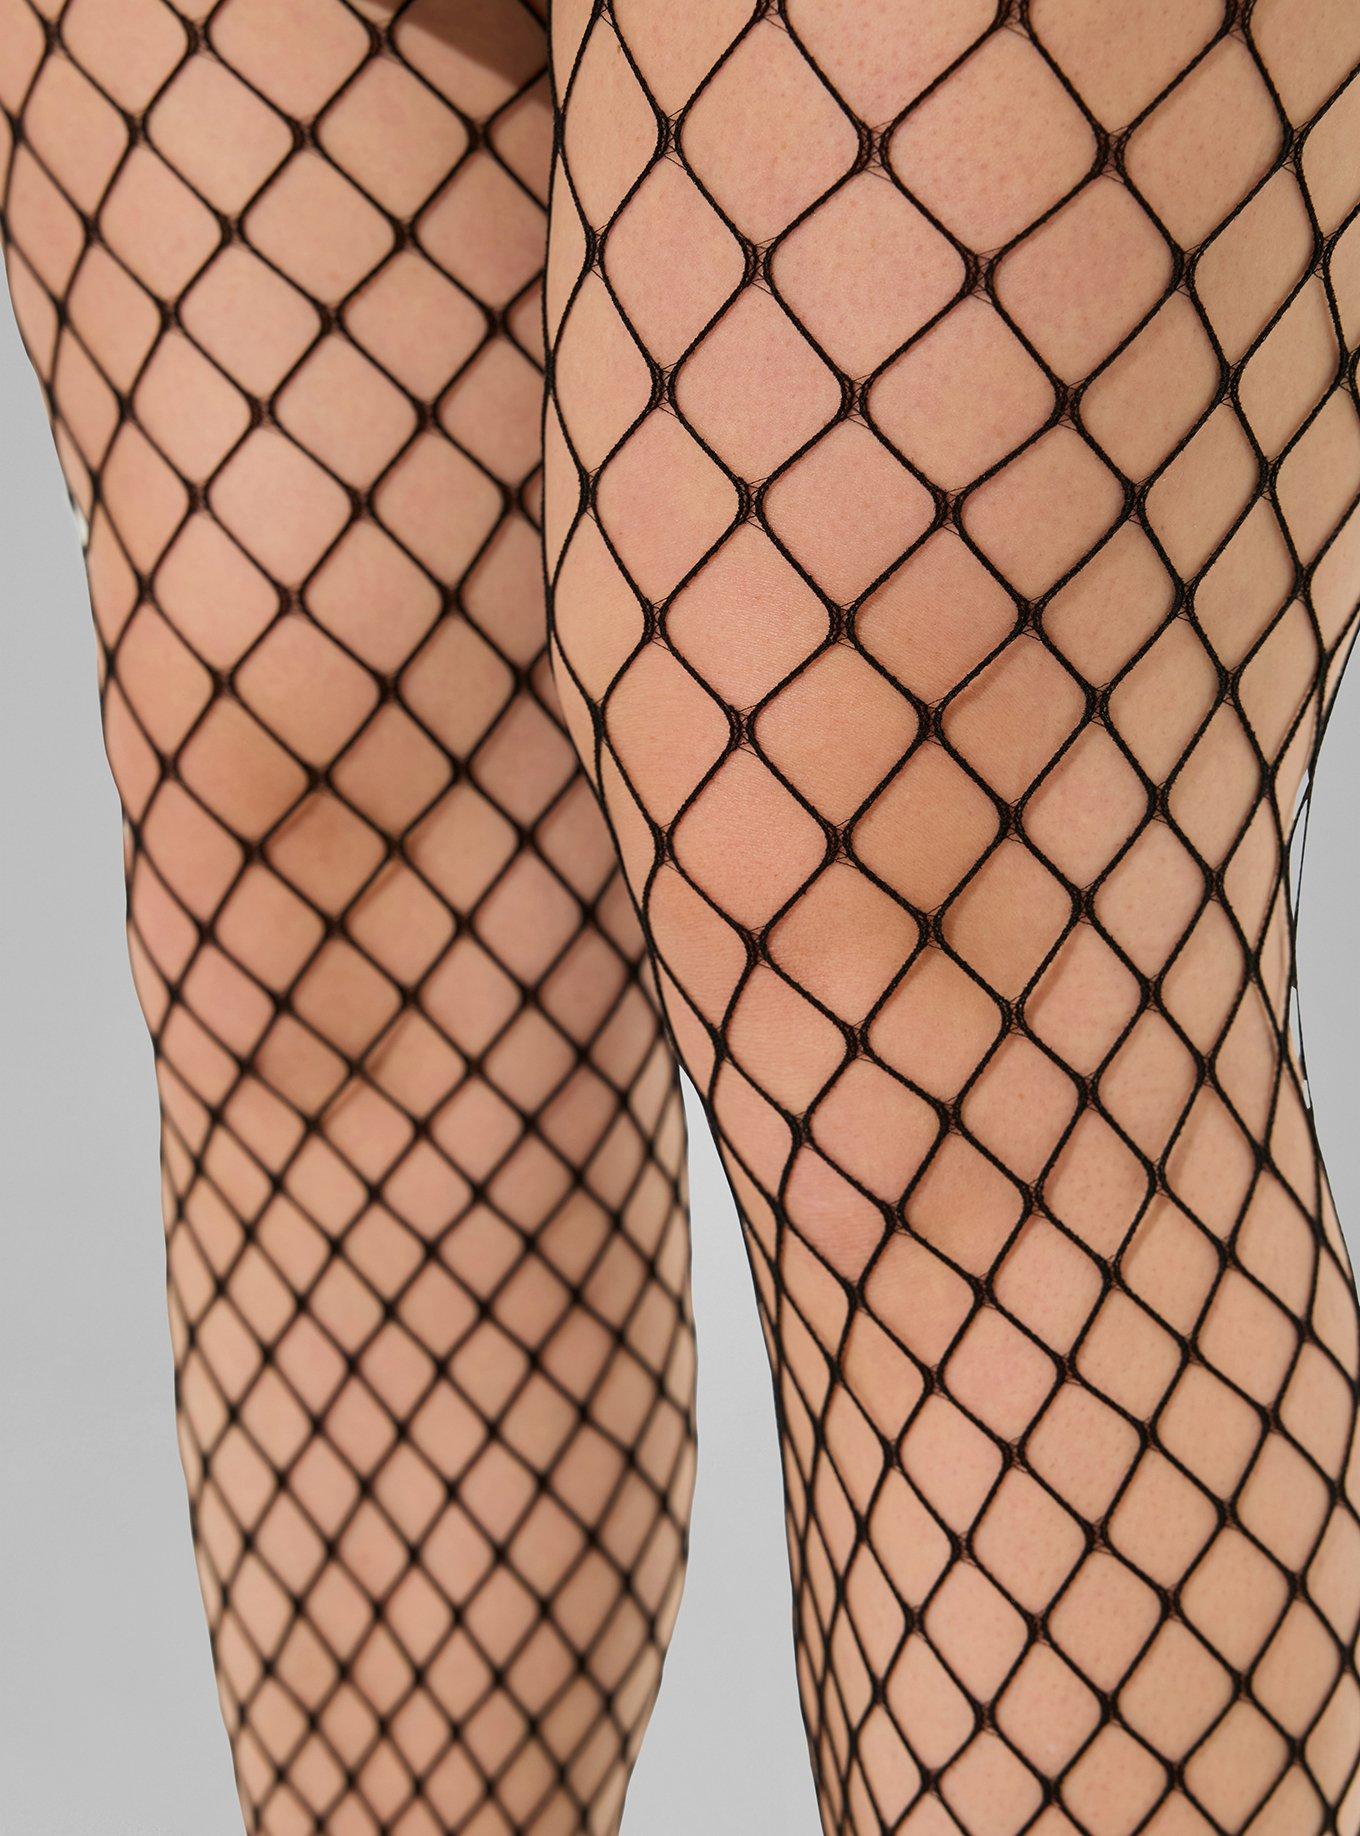 NWT $42 SPANX Size A MICRO FISHNET MID-THIGH SHAPING TIGHTS Black